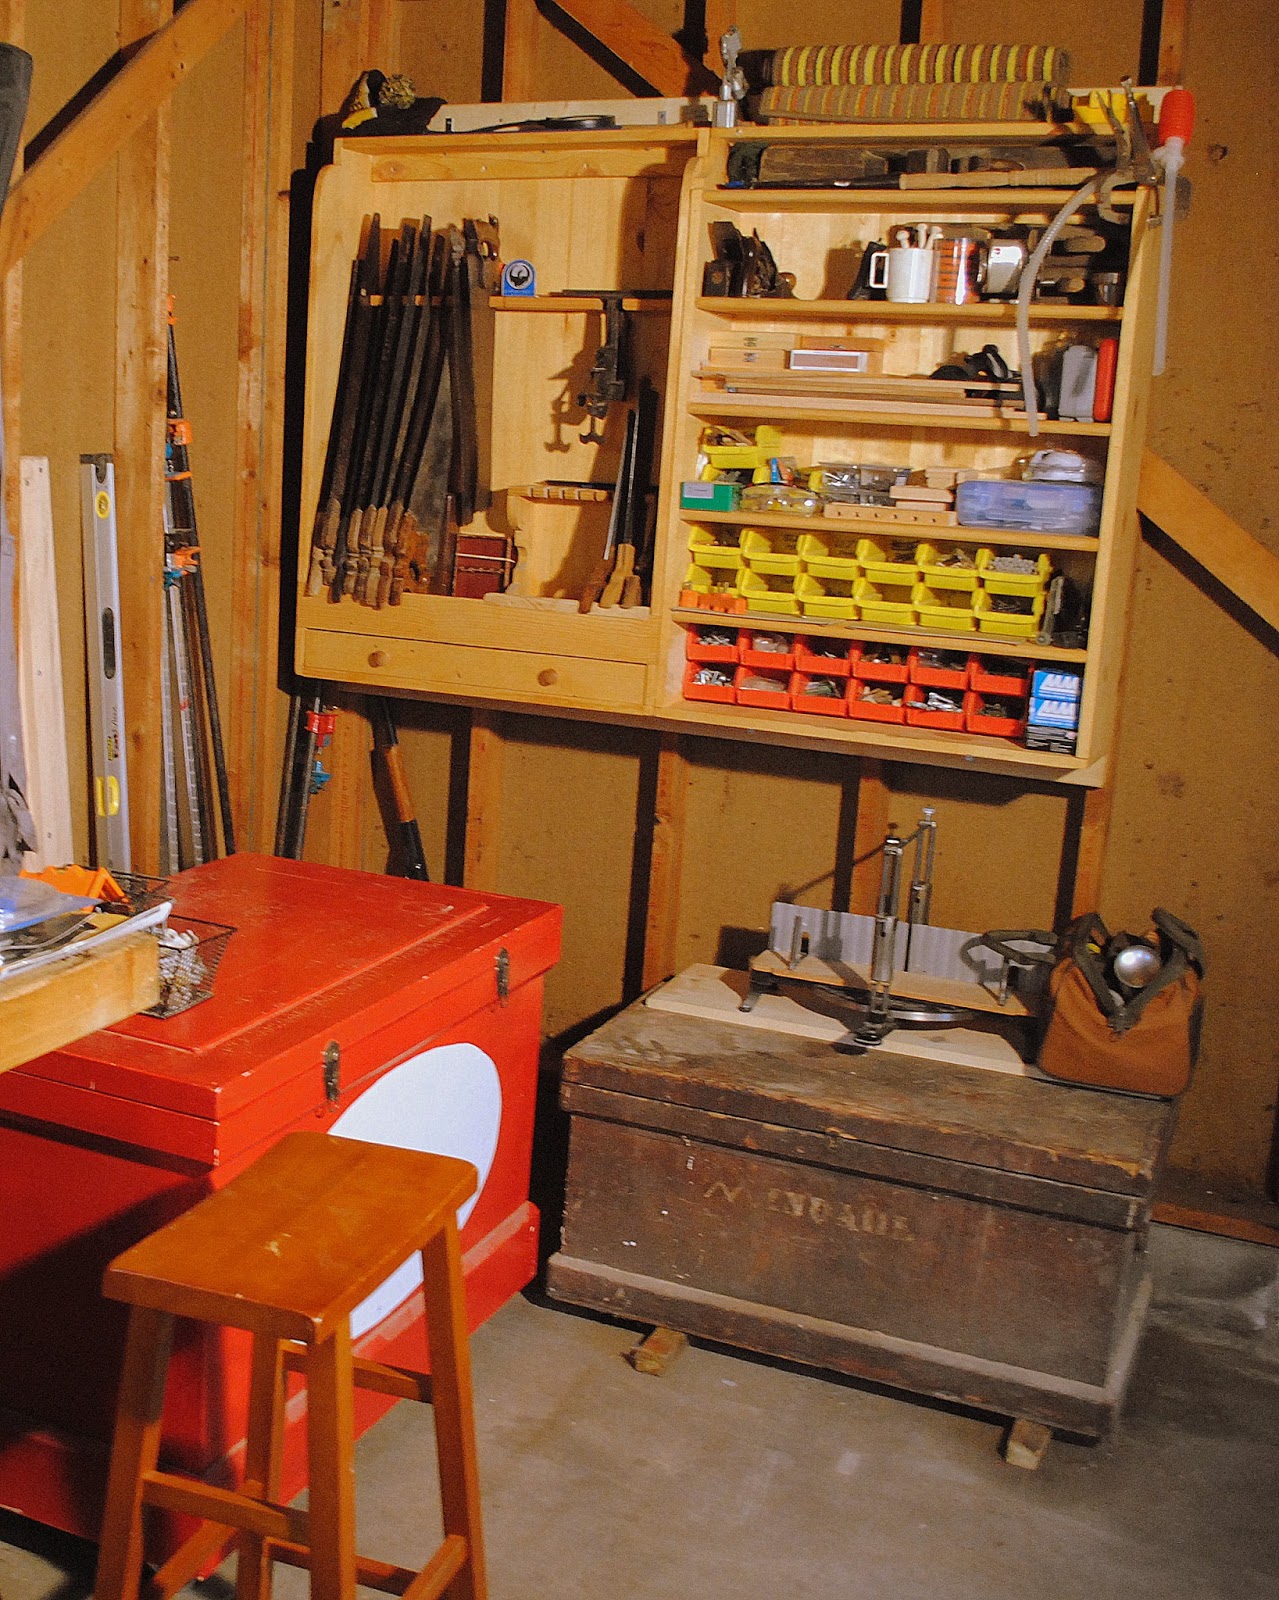 Garden Shed Plan Software: Tool Chest Plans Wooden Plans